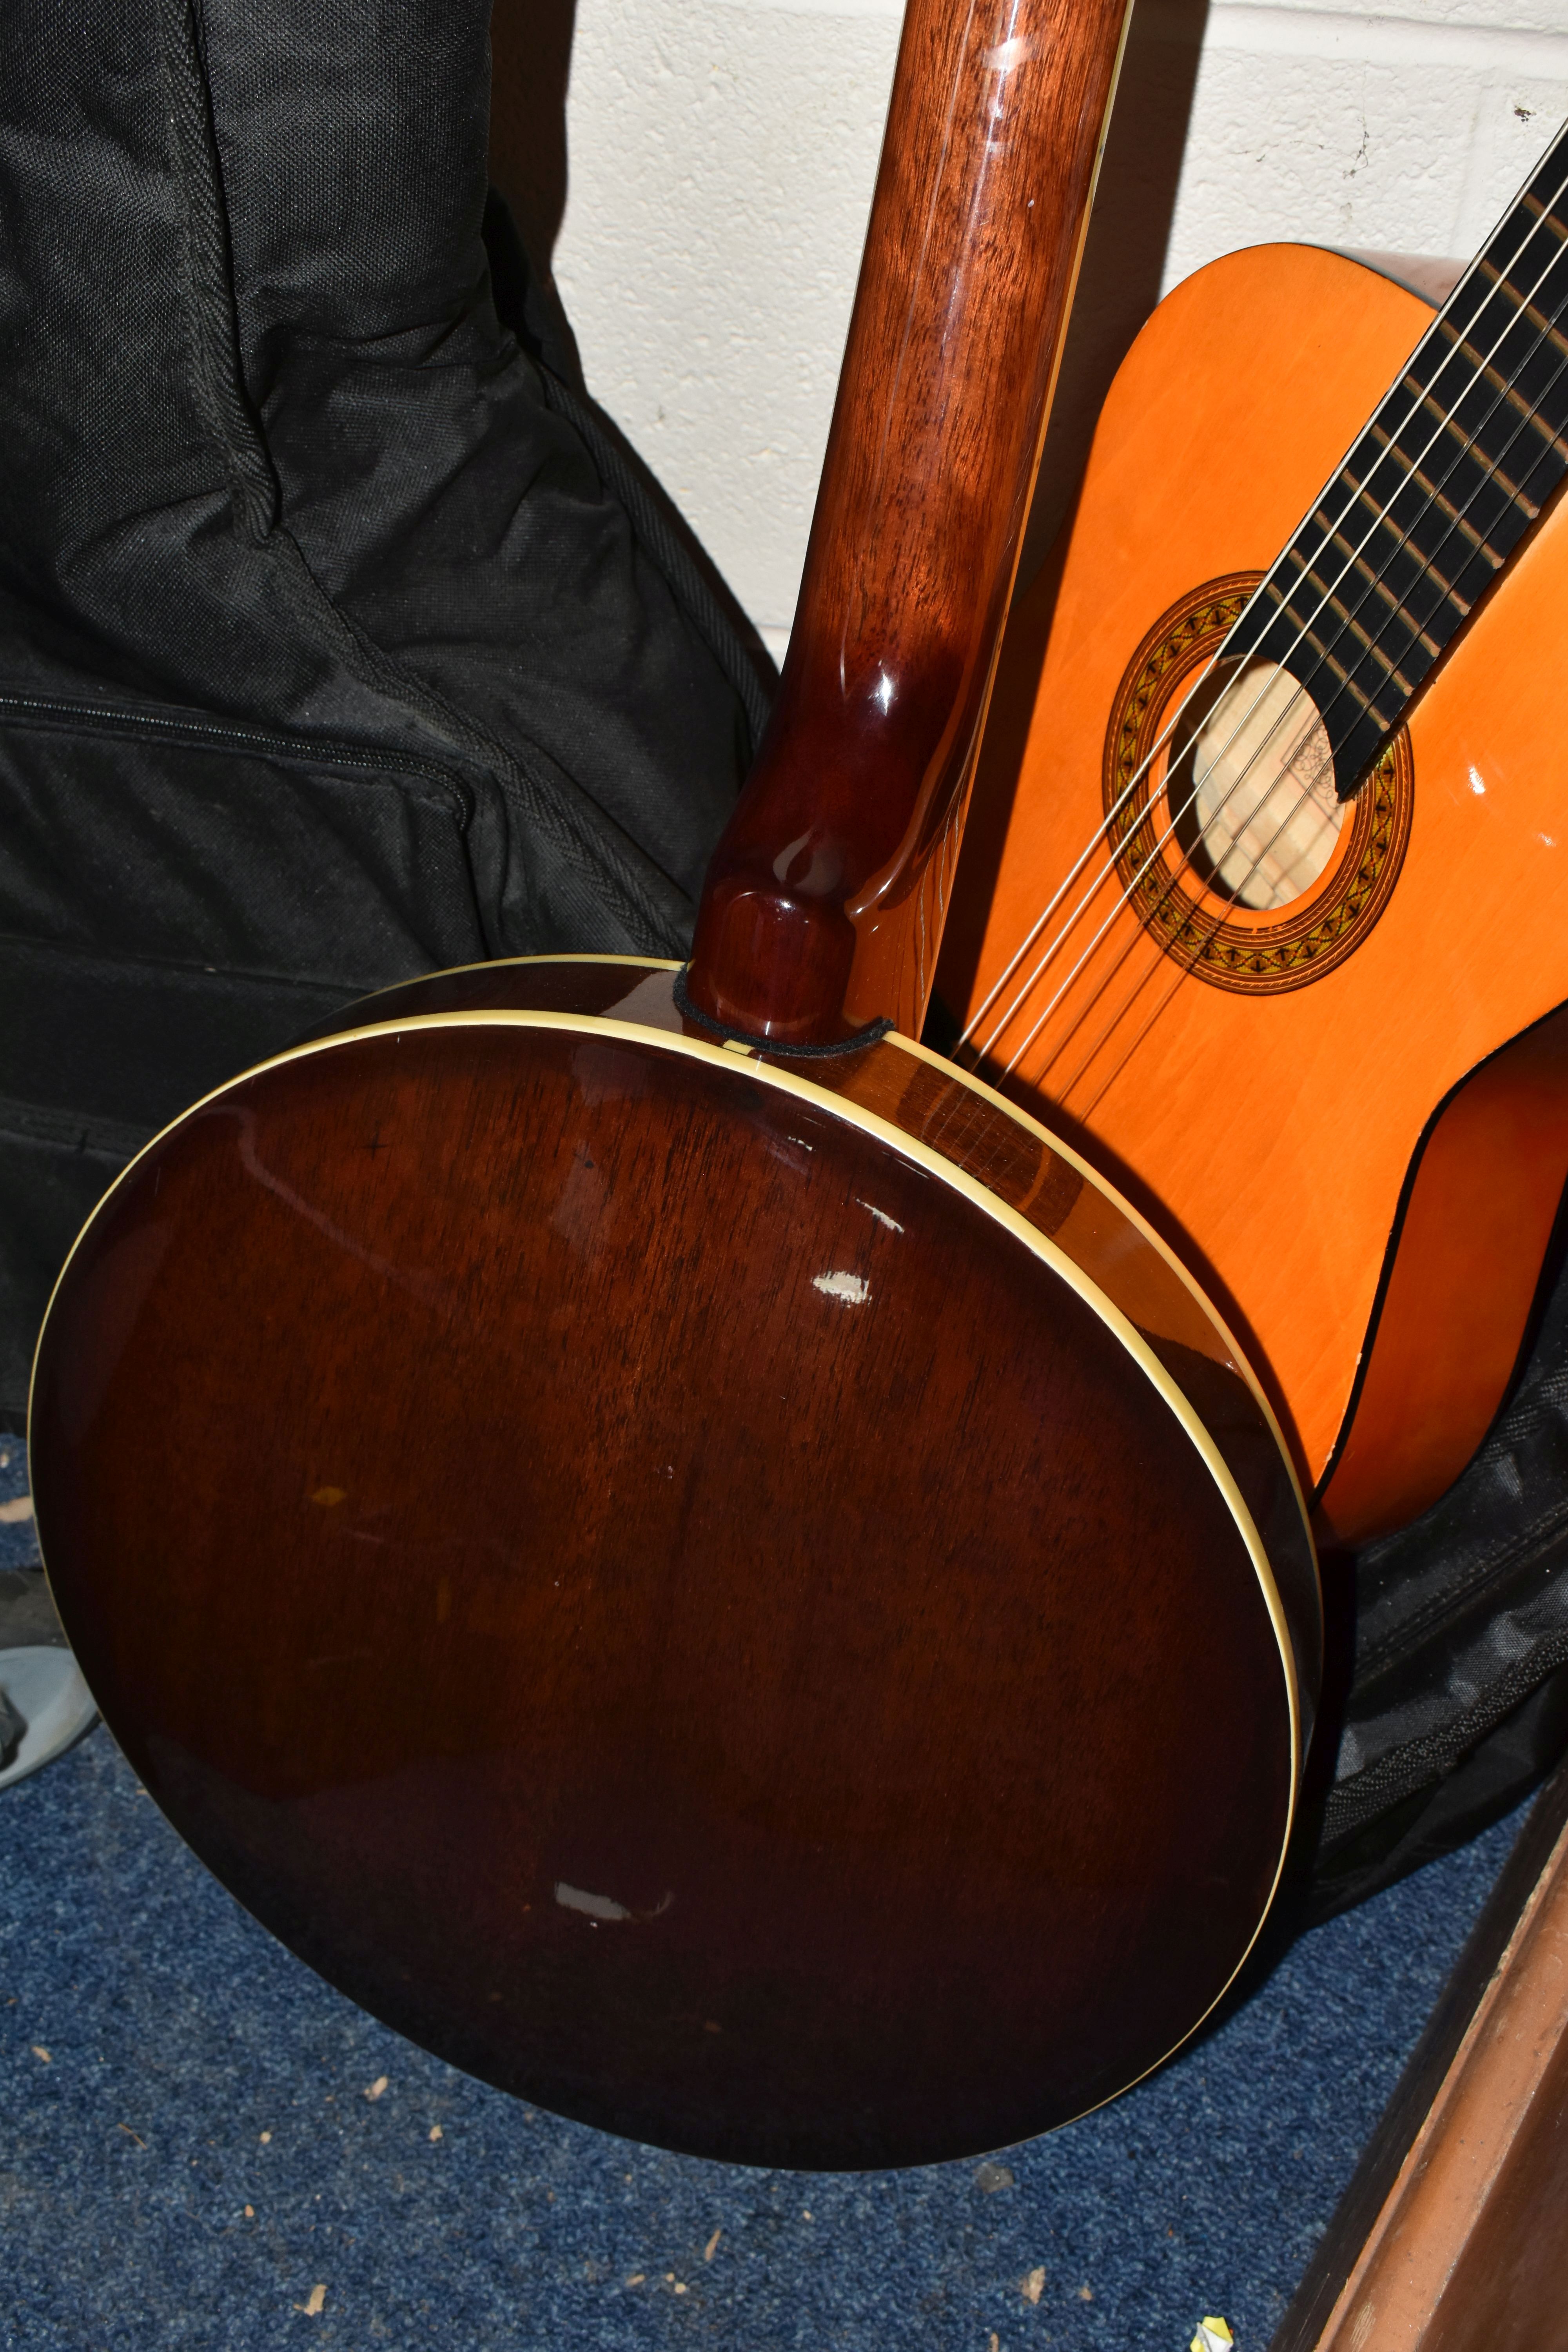 A 'VINTAGE' BANJO AND CHILD'S ACOUSTIC GUITAR, comprising a six string banjo with a soft case and - Image 7 of 8